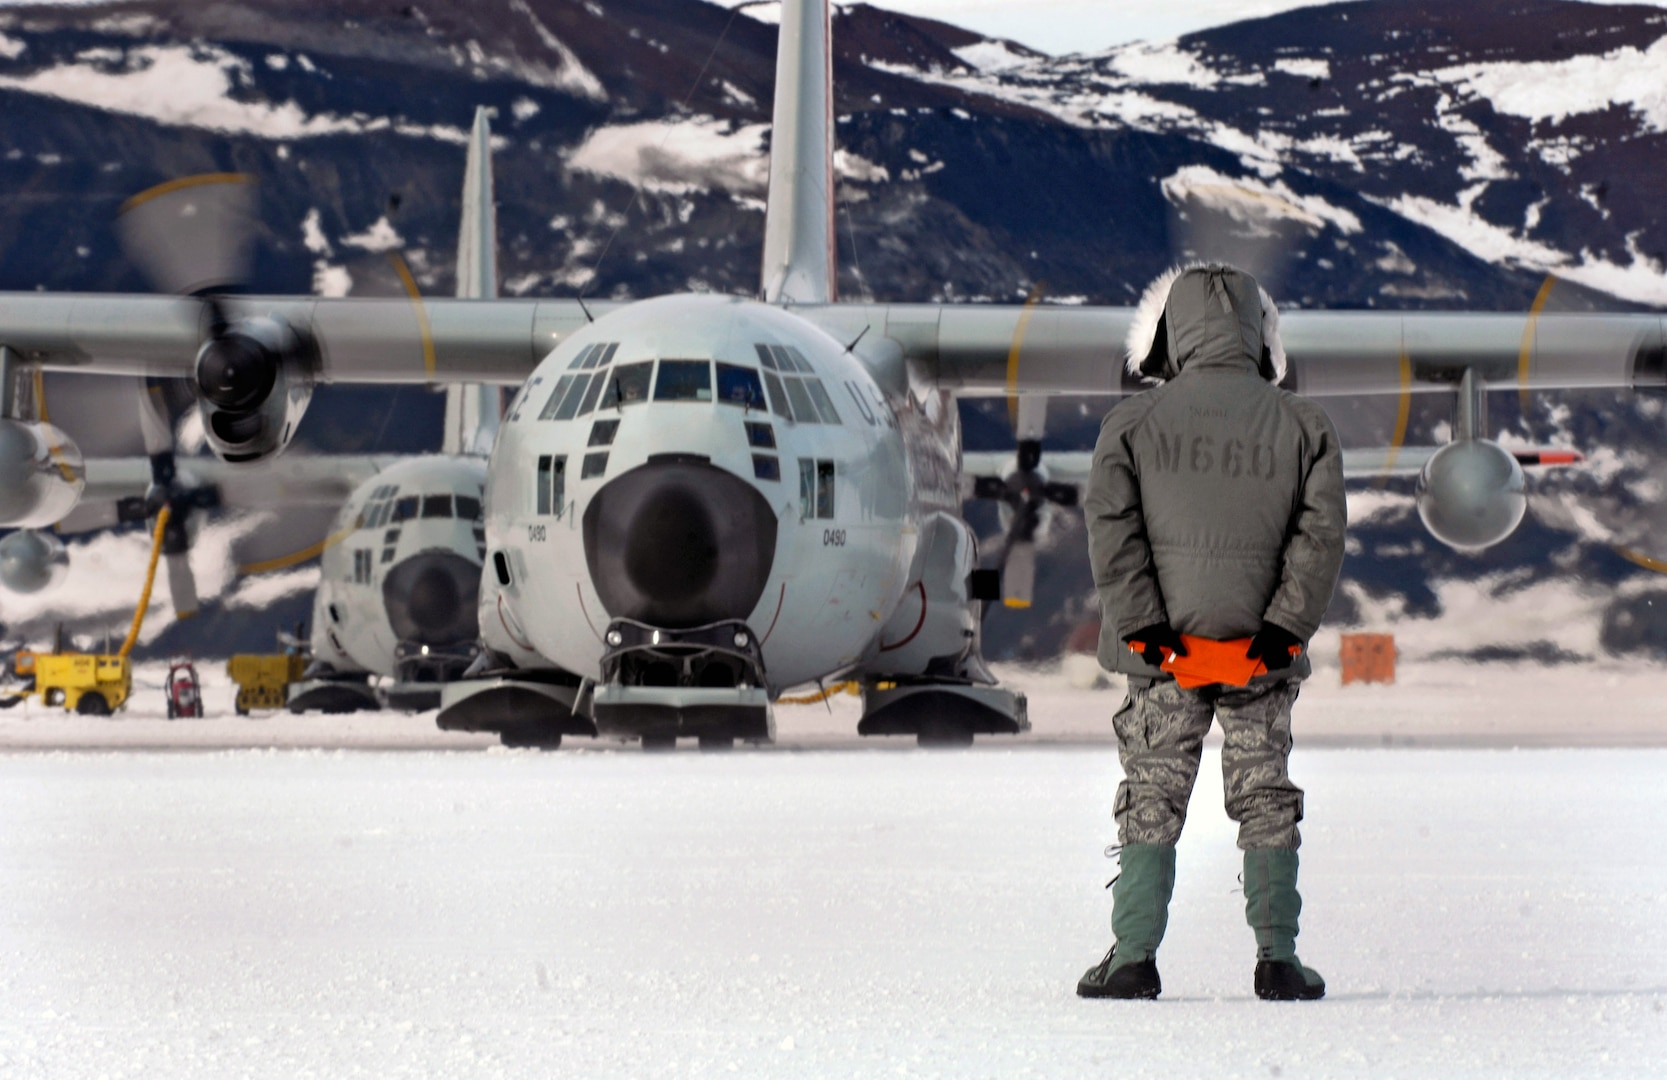 Tech. Sgt. Kevin Call waits to marshal an LC-130 Hercules from the New York Air National Guard’s 109th Airlift Wing to a parking spot on the annual sea ice runway Nov. 26, 2007 near McMurdo Station, Antarctica, during Operation Deep Freeze. The 109th AW recently wrapped up its 27th season of flying the ski-equipped LC-130 in support of the operation, which provides military logistics support to the National Science Foundation’s Antarctic Program. The wing is the only unit in the U.S. military equipped with the LC-130 “Skibirds.” 